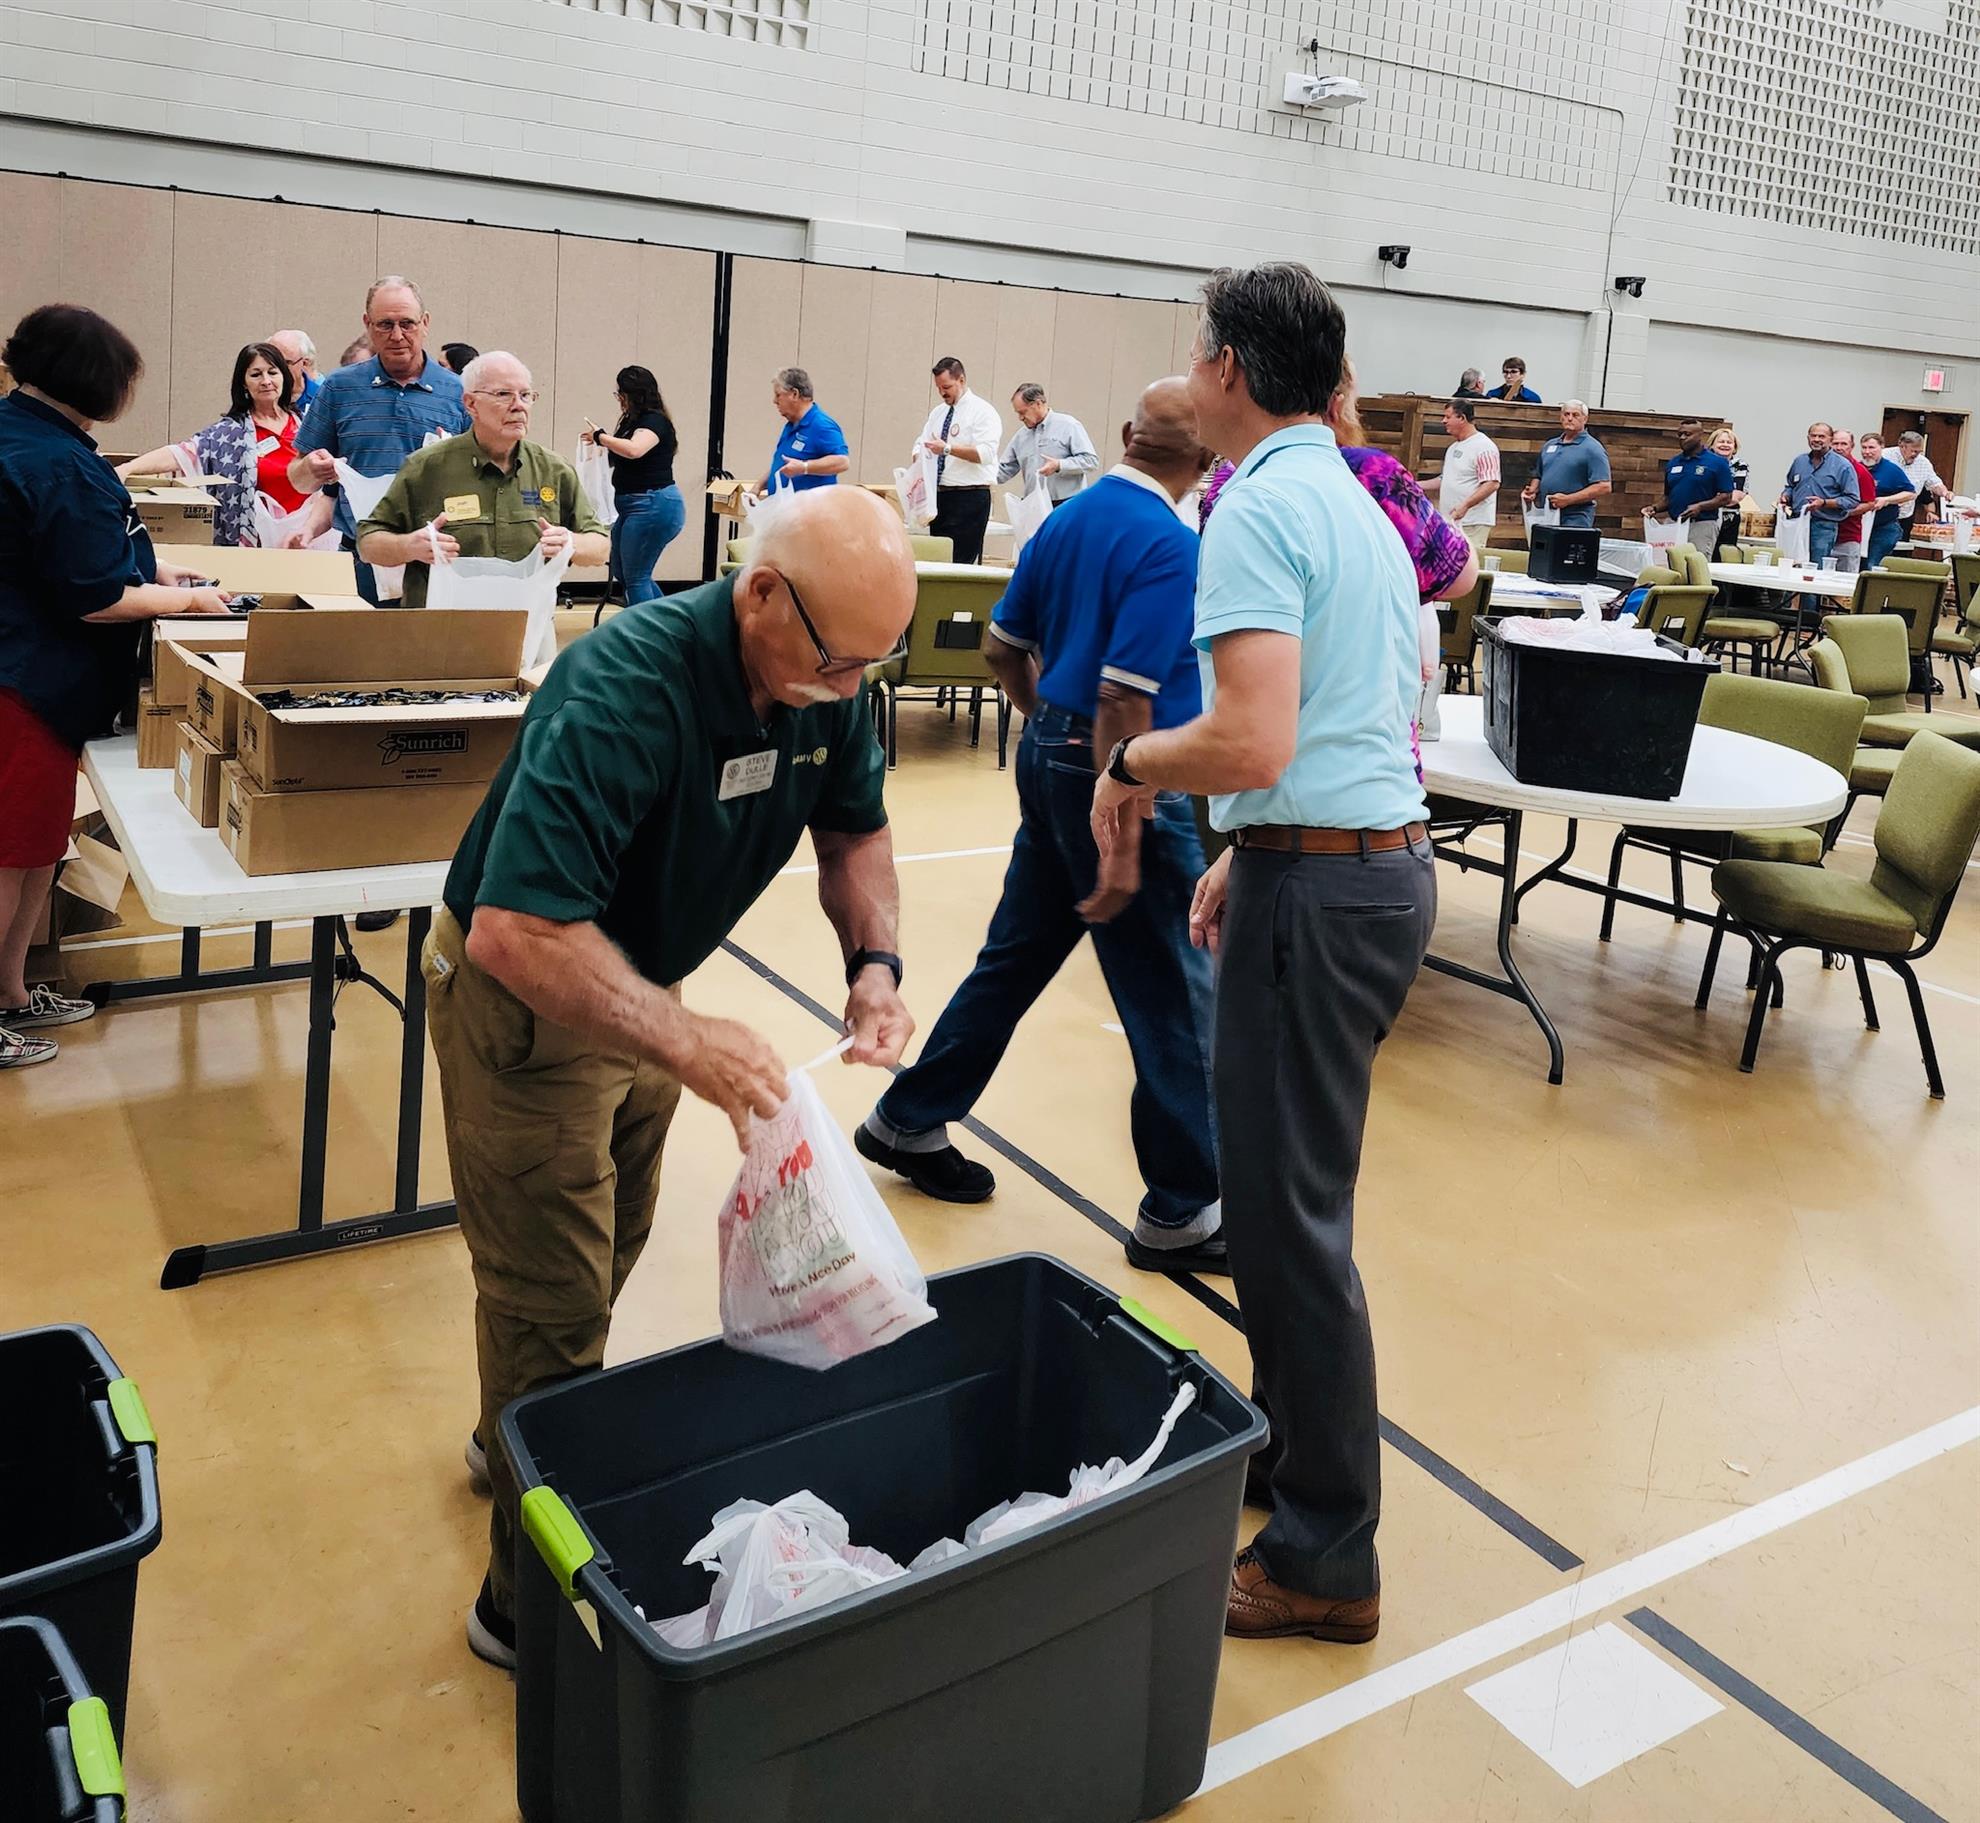 Rotarians form an assembly line to pack weekend food kits.